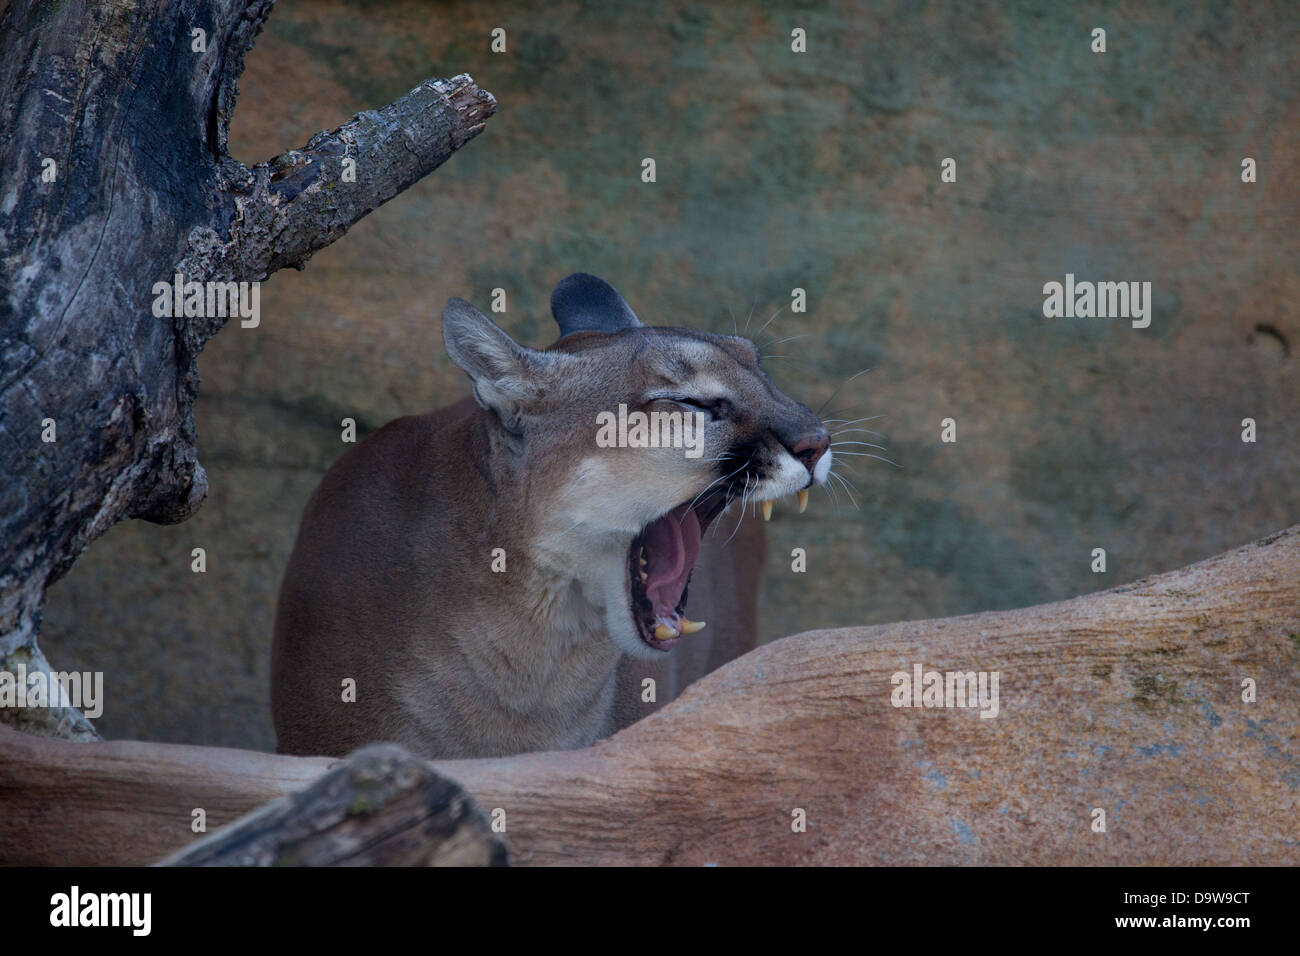 Puma Growling High Resolution Stock Photography and Images - Alamy